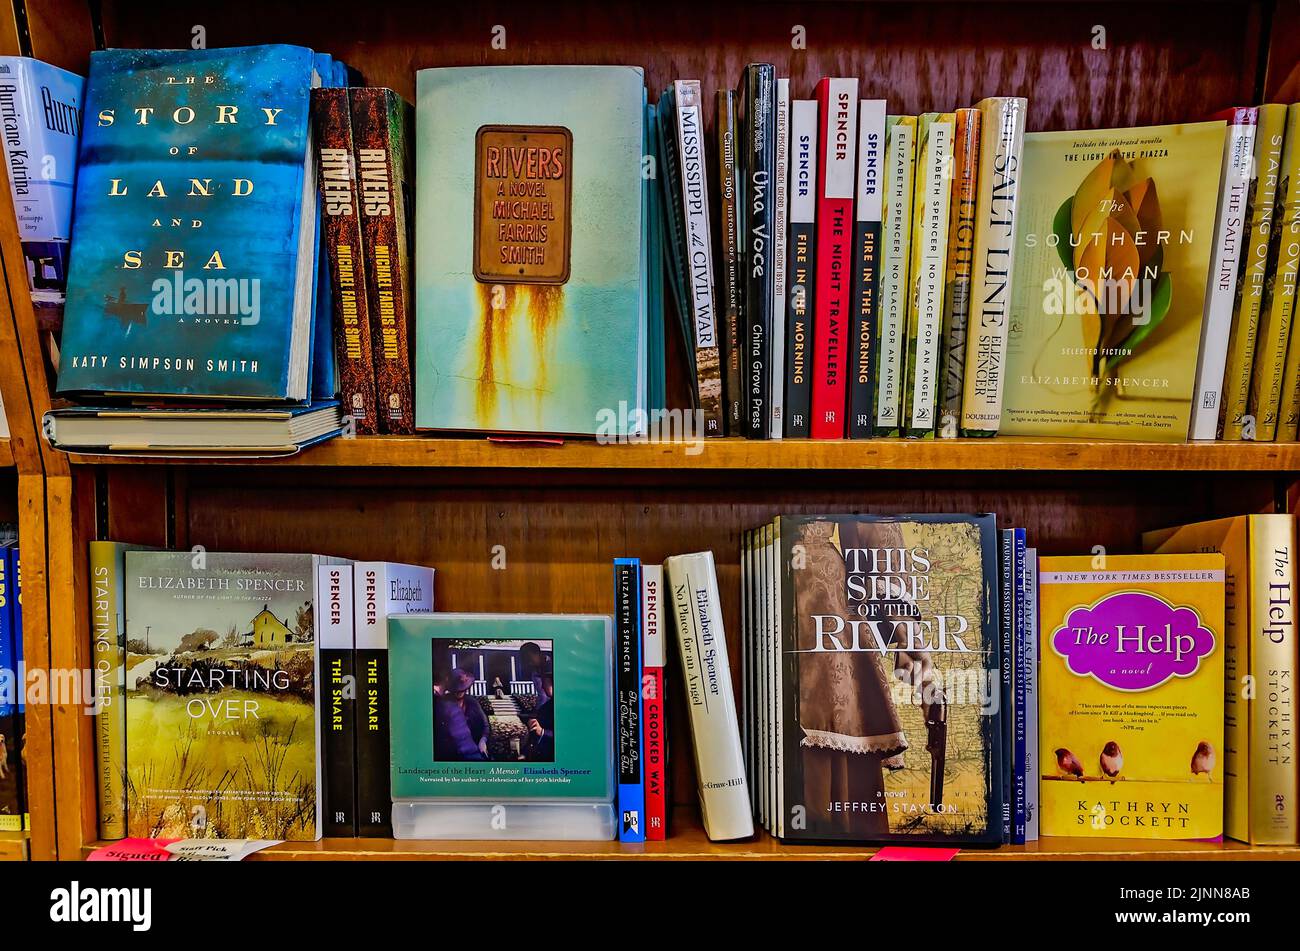 Books by Mississippi authors fill the shelves at Square Books, May 31, 2015, in Oxford, Mississippi. The family-owned bookstore was founded in 1979. Stock Photo